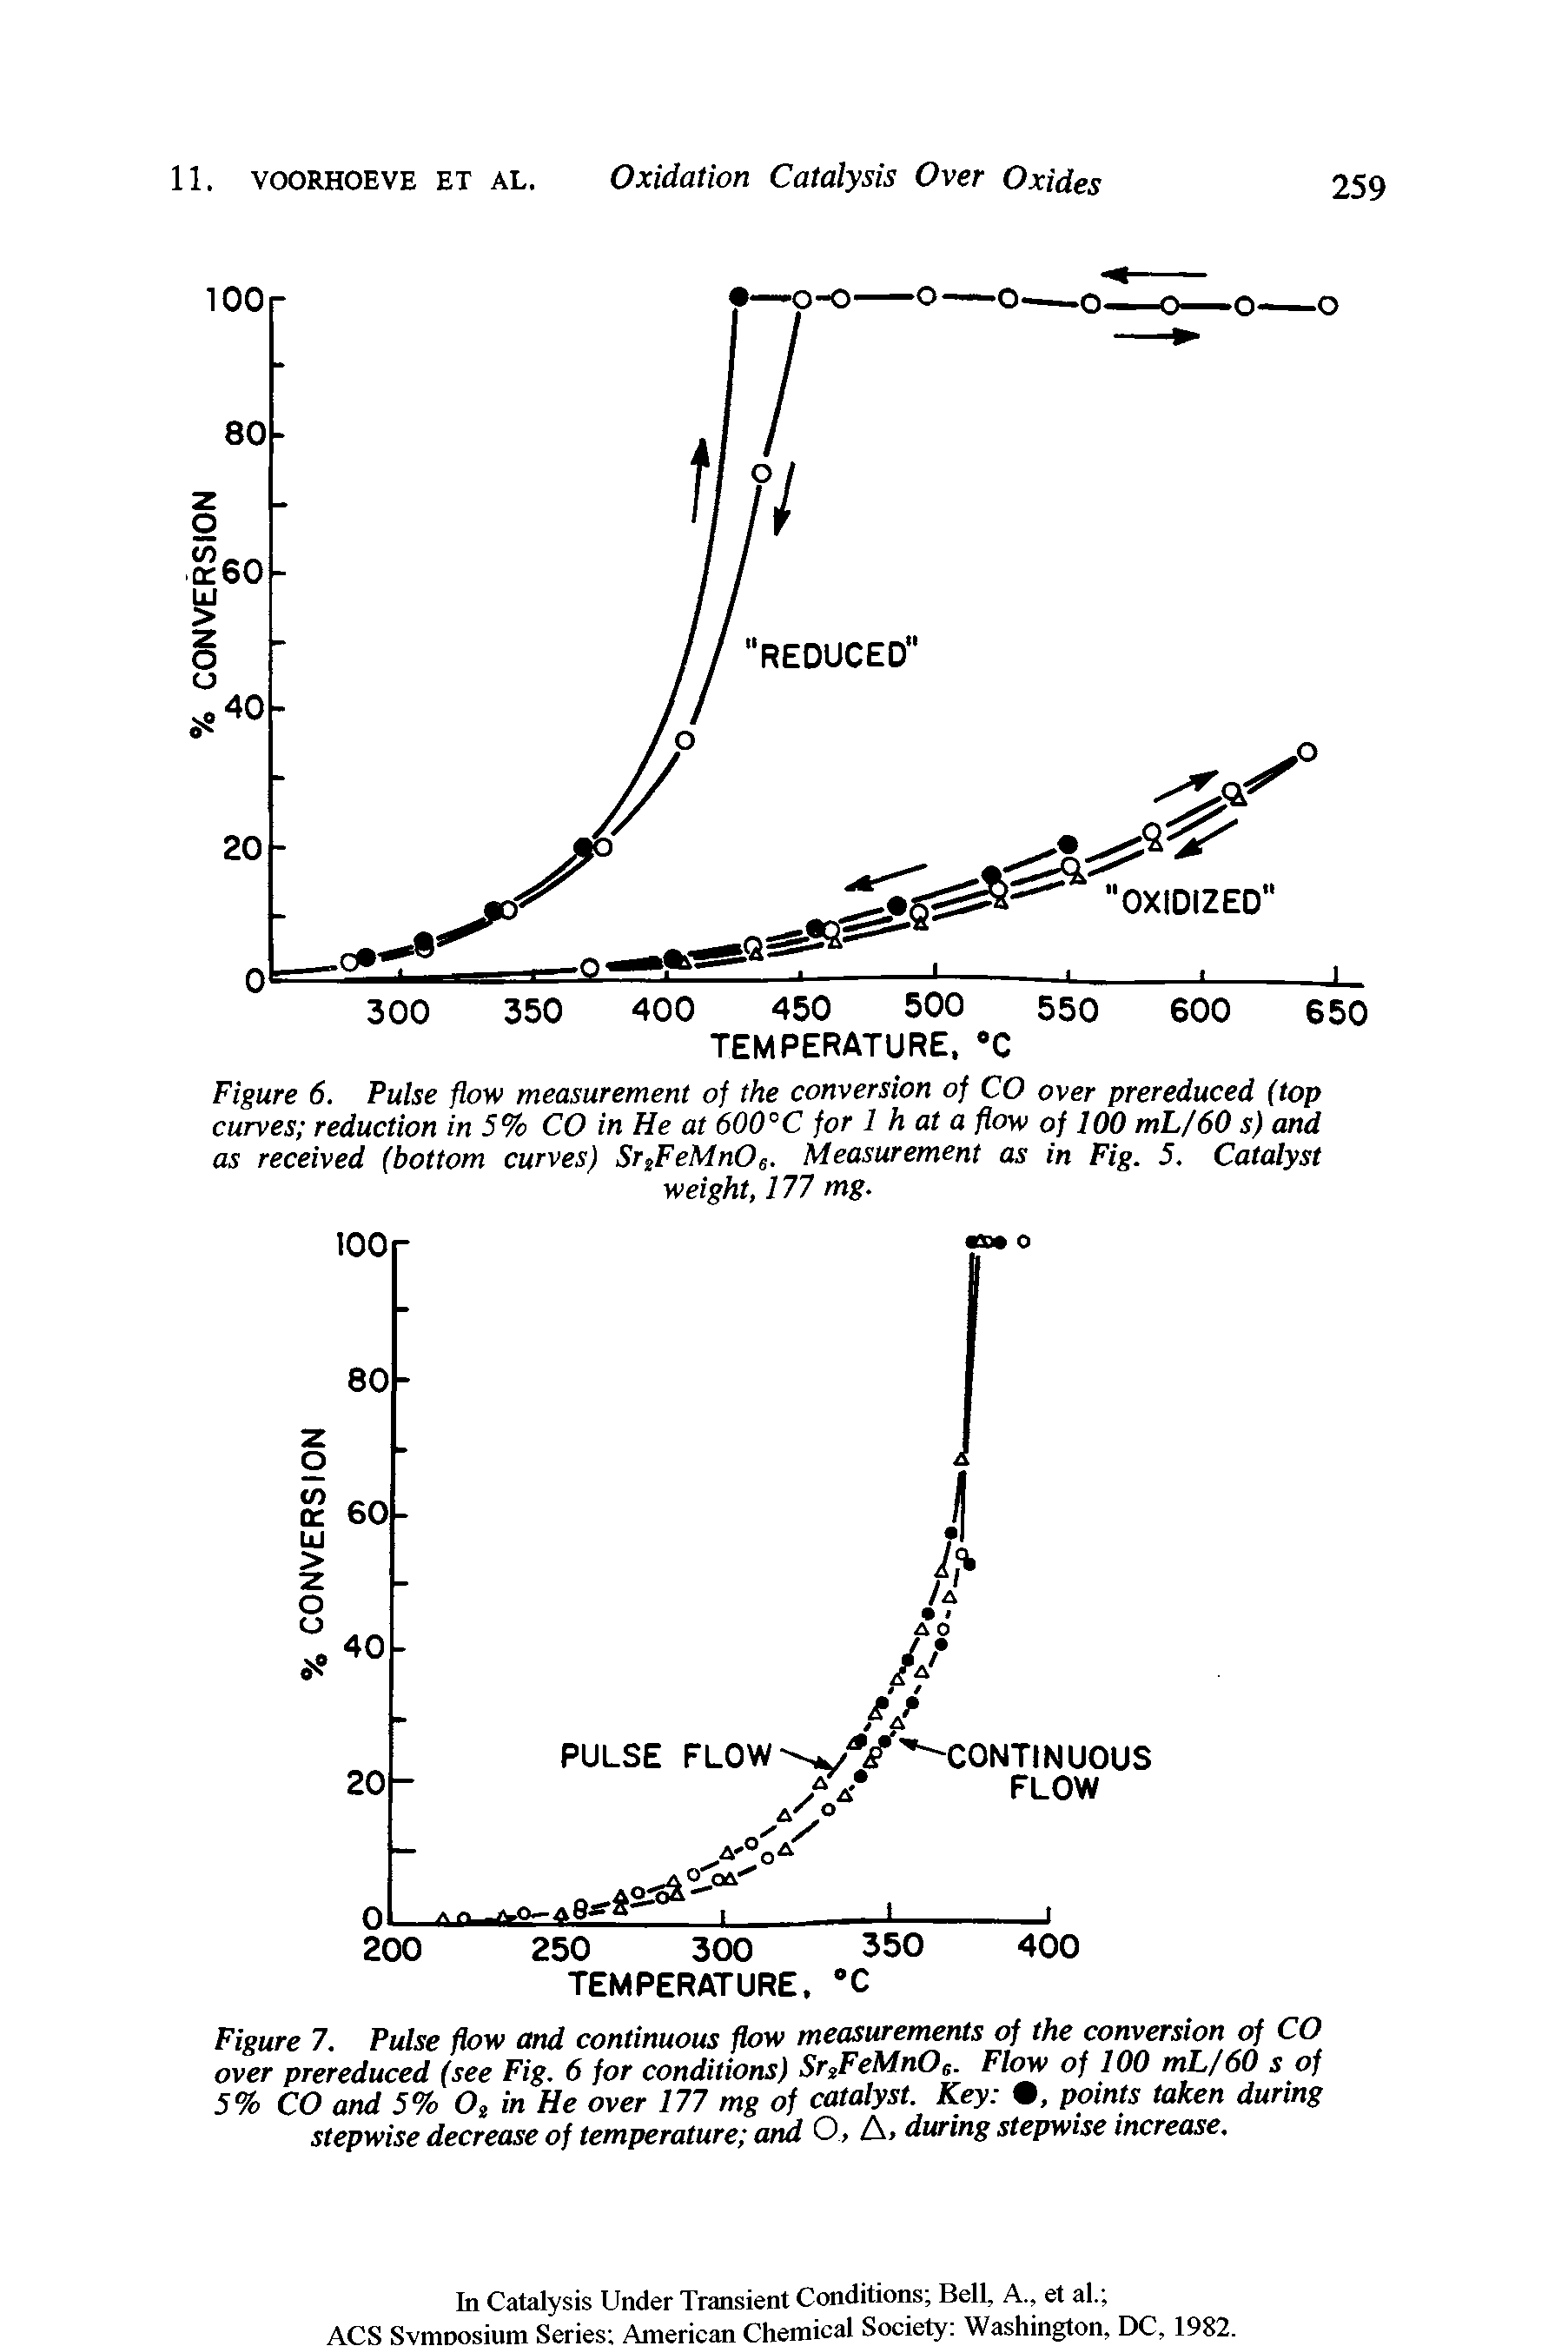 Figure 7. Pulse flow and continuous flow measurements of the conversion of CO over prereduced (see Fig. 6 for conditions) Sr,tFeMnOs. Flow of 100 mL/60 s of 5% CO and 5% 02 in He over 177 mg of catalyst. Key , points taken during stepwise decrease of temperature and O, A, during stepwise increase.